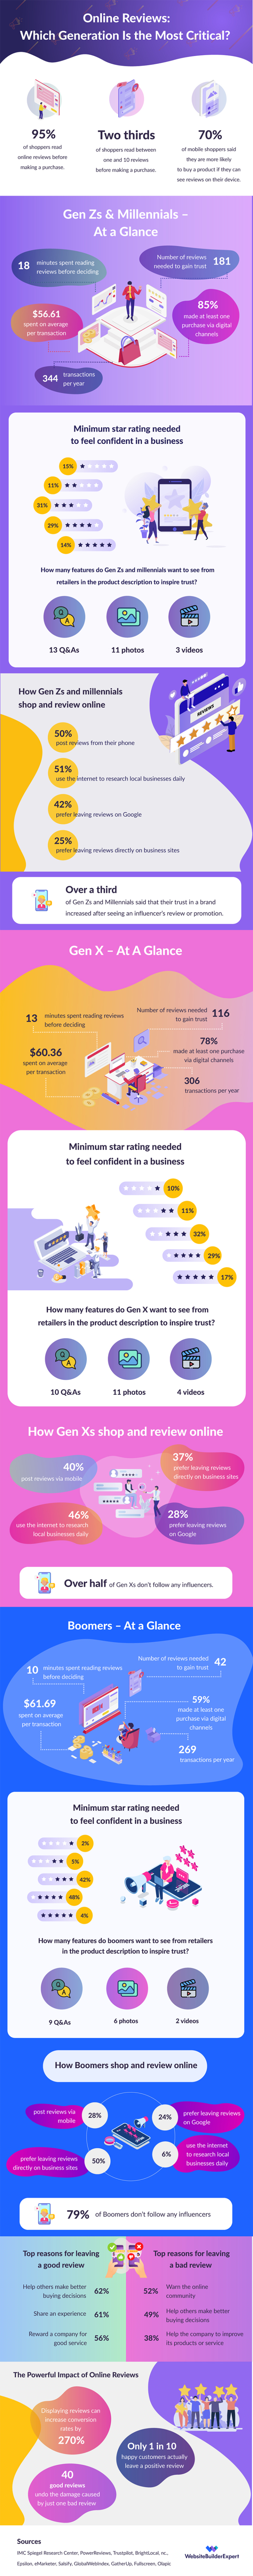 Online reviews infographic